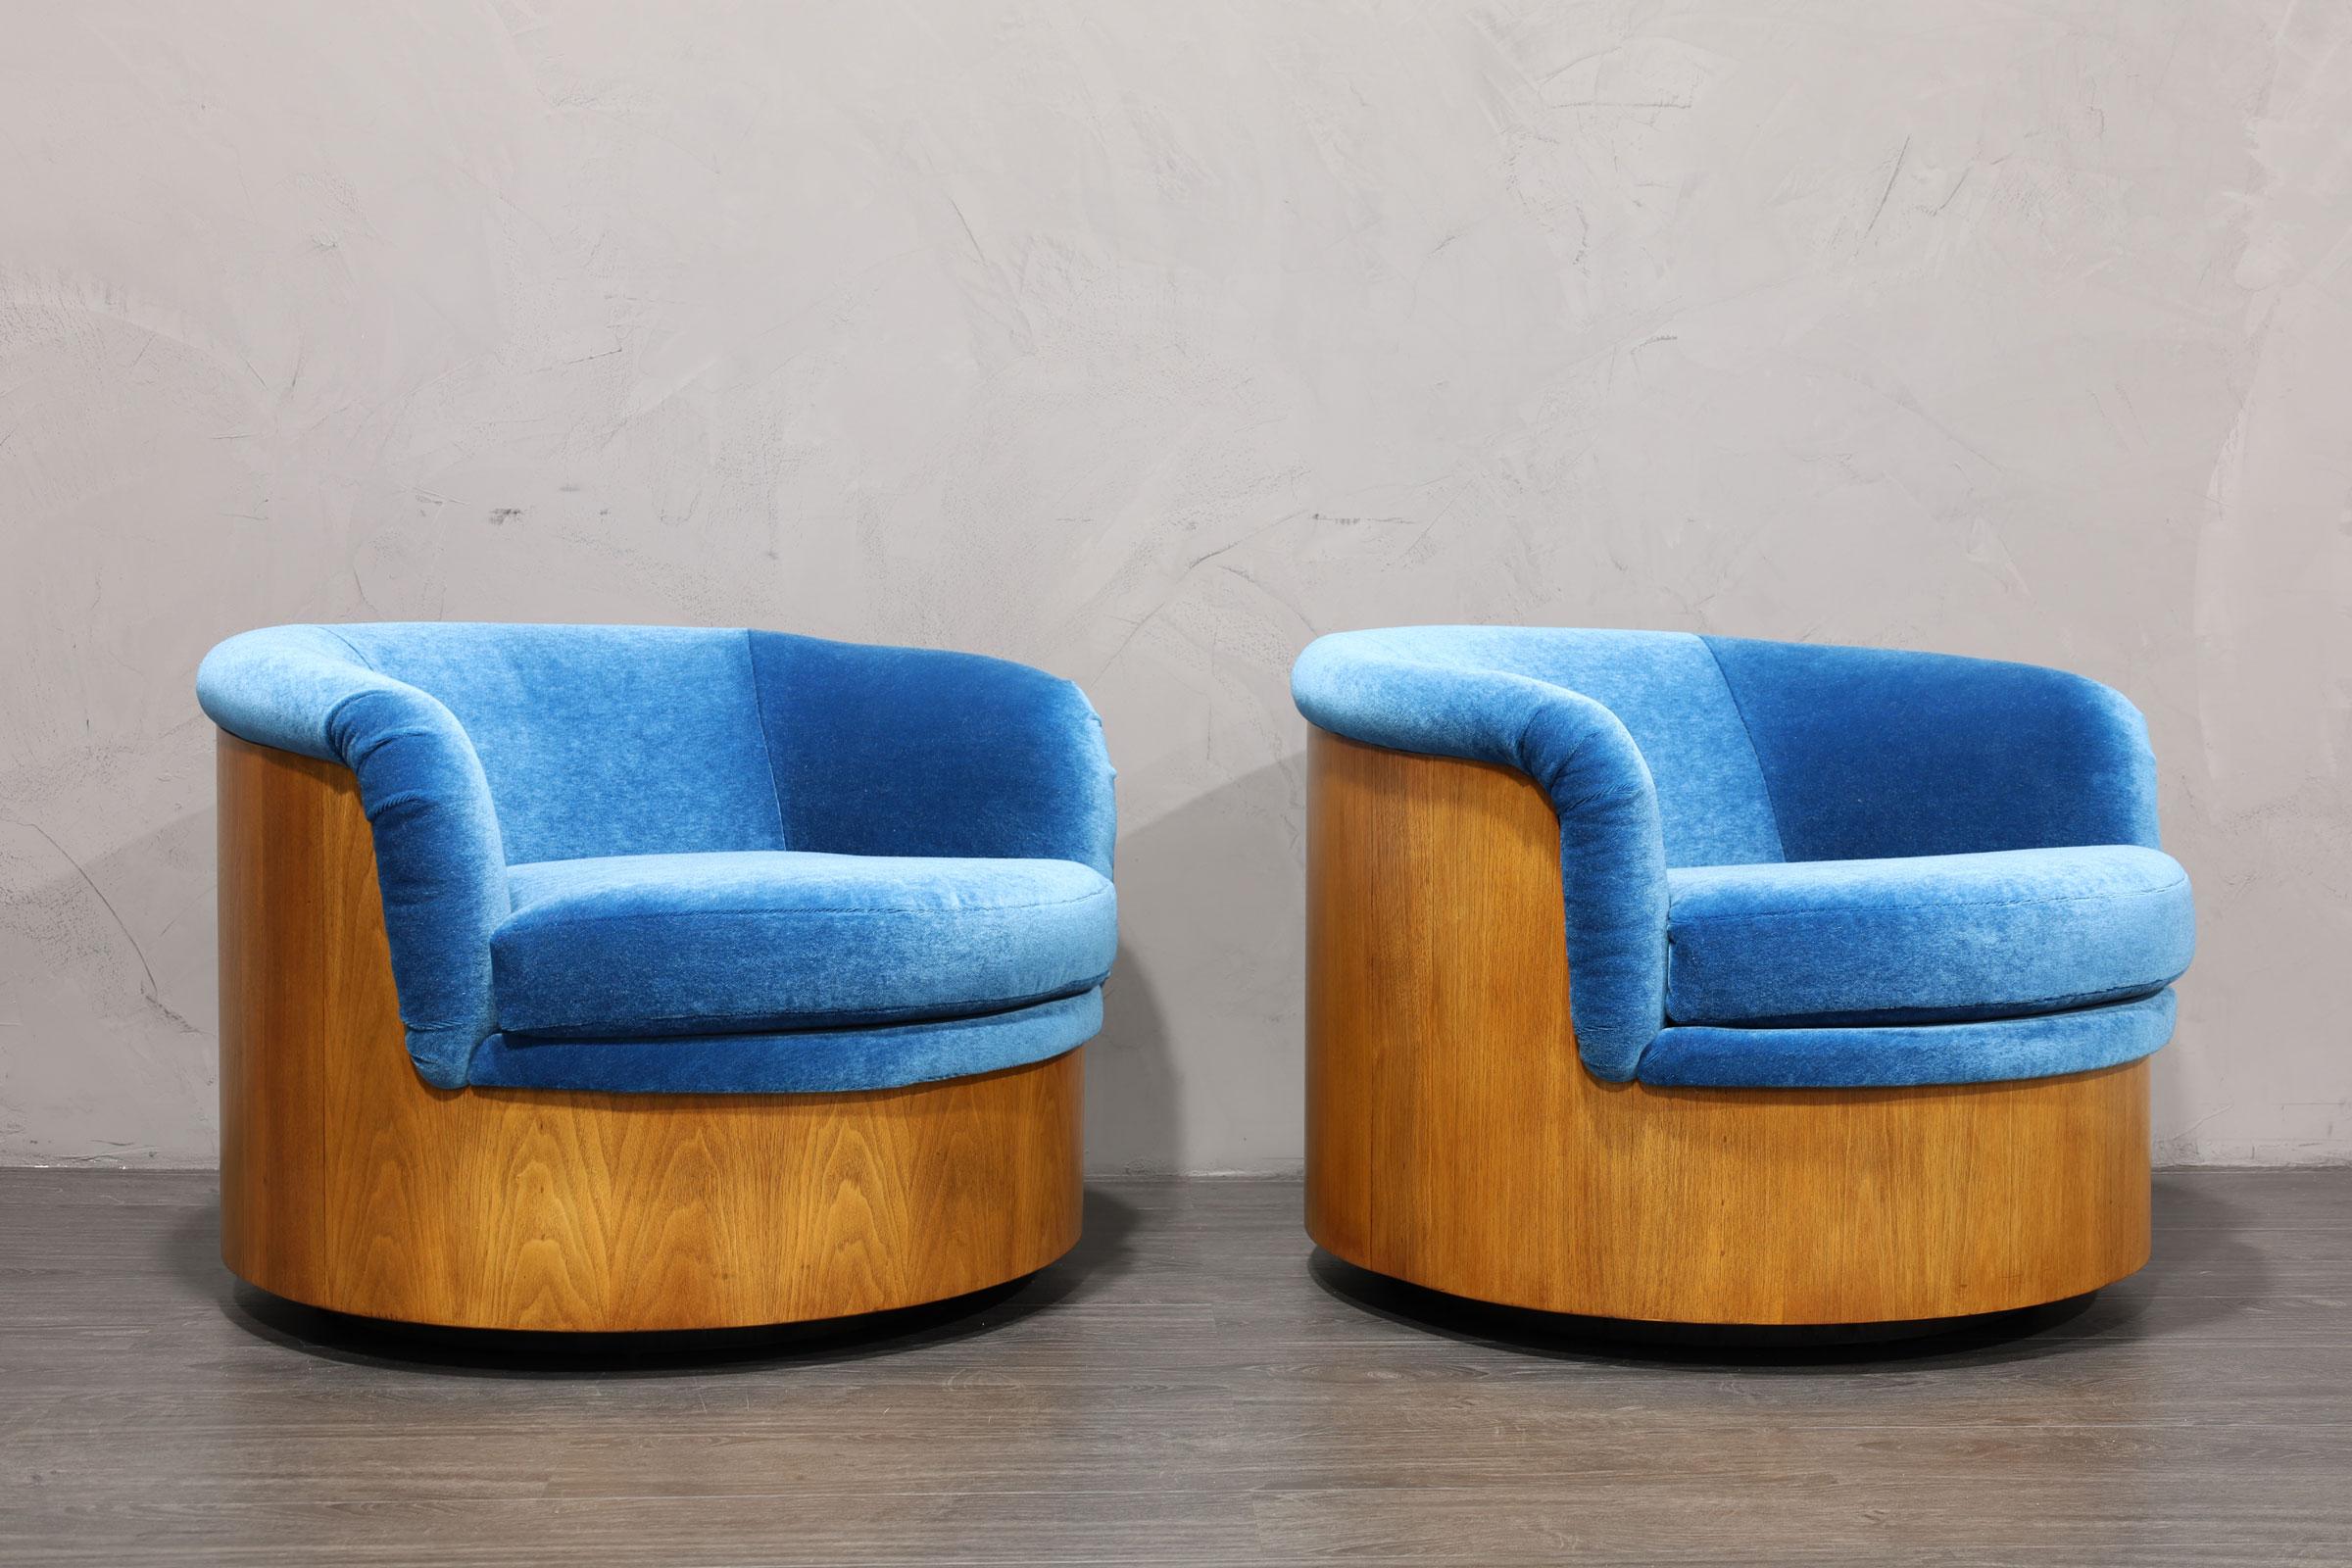 A very unique pair of swivel chairs attributed to Plycraft. These have a walnut veneer finish along the back and base. We have reupholstered in a blue mohair. The chairs are very comfortable and great looking!